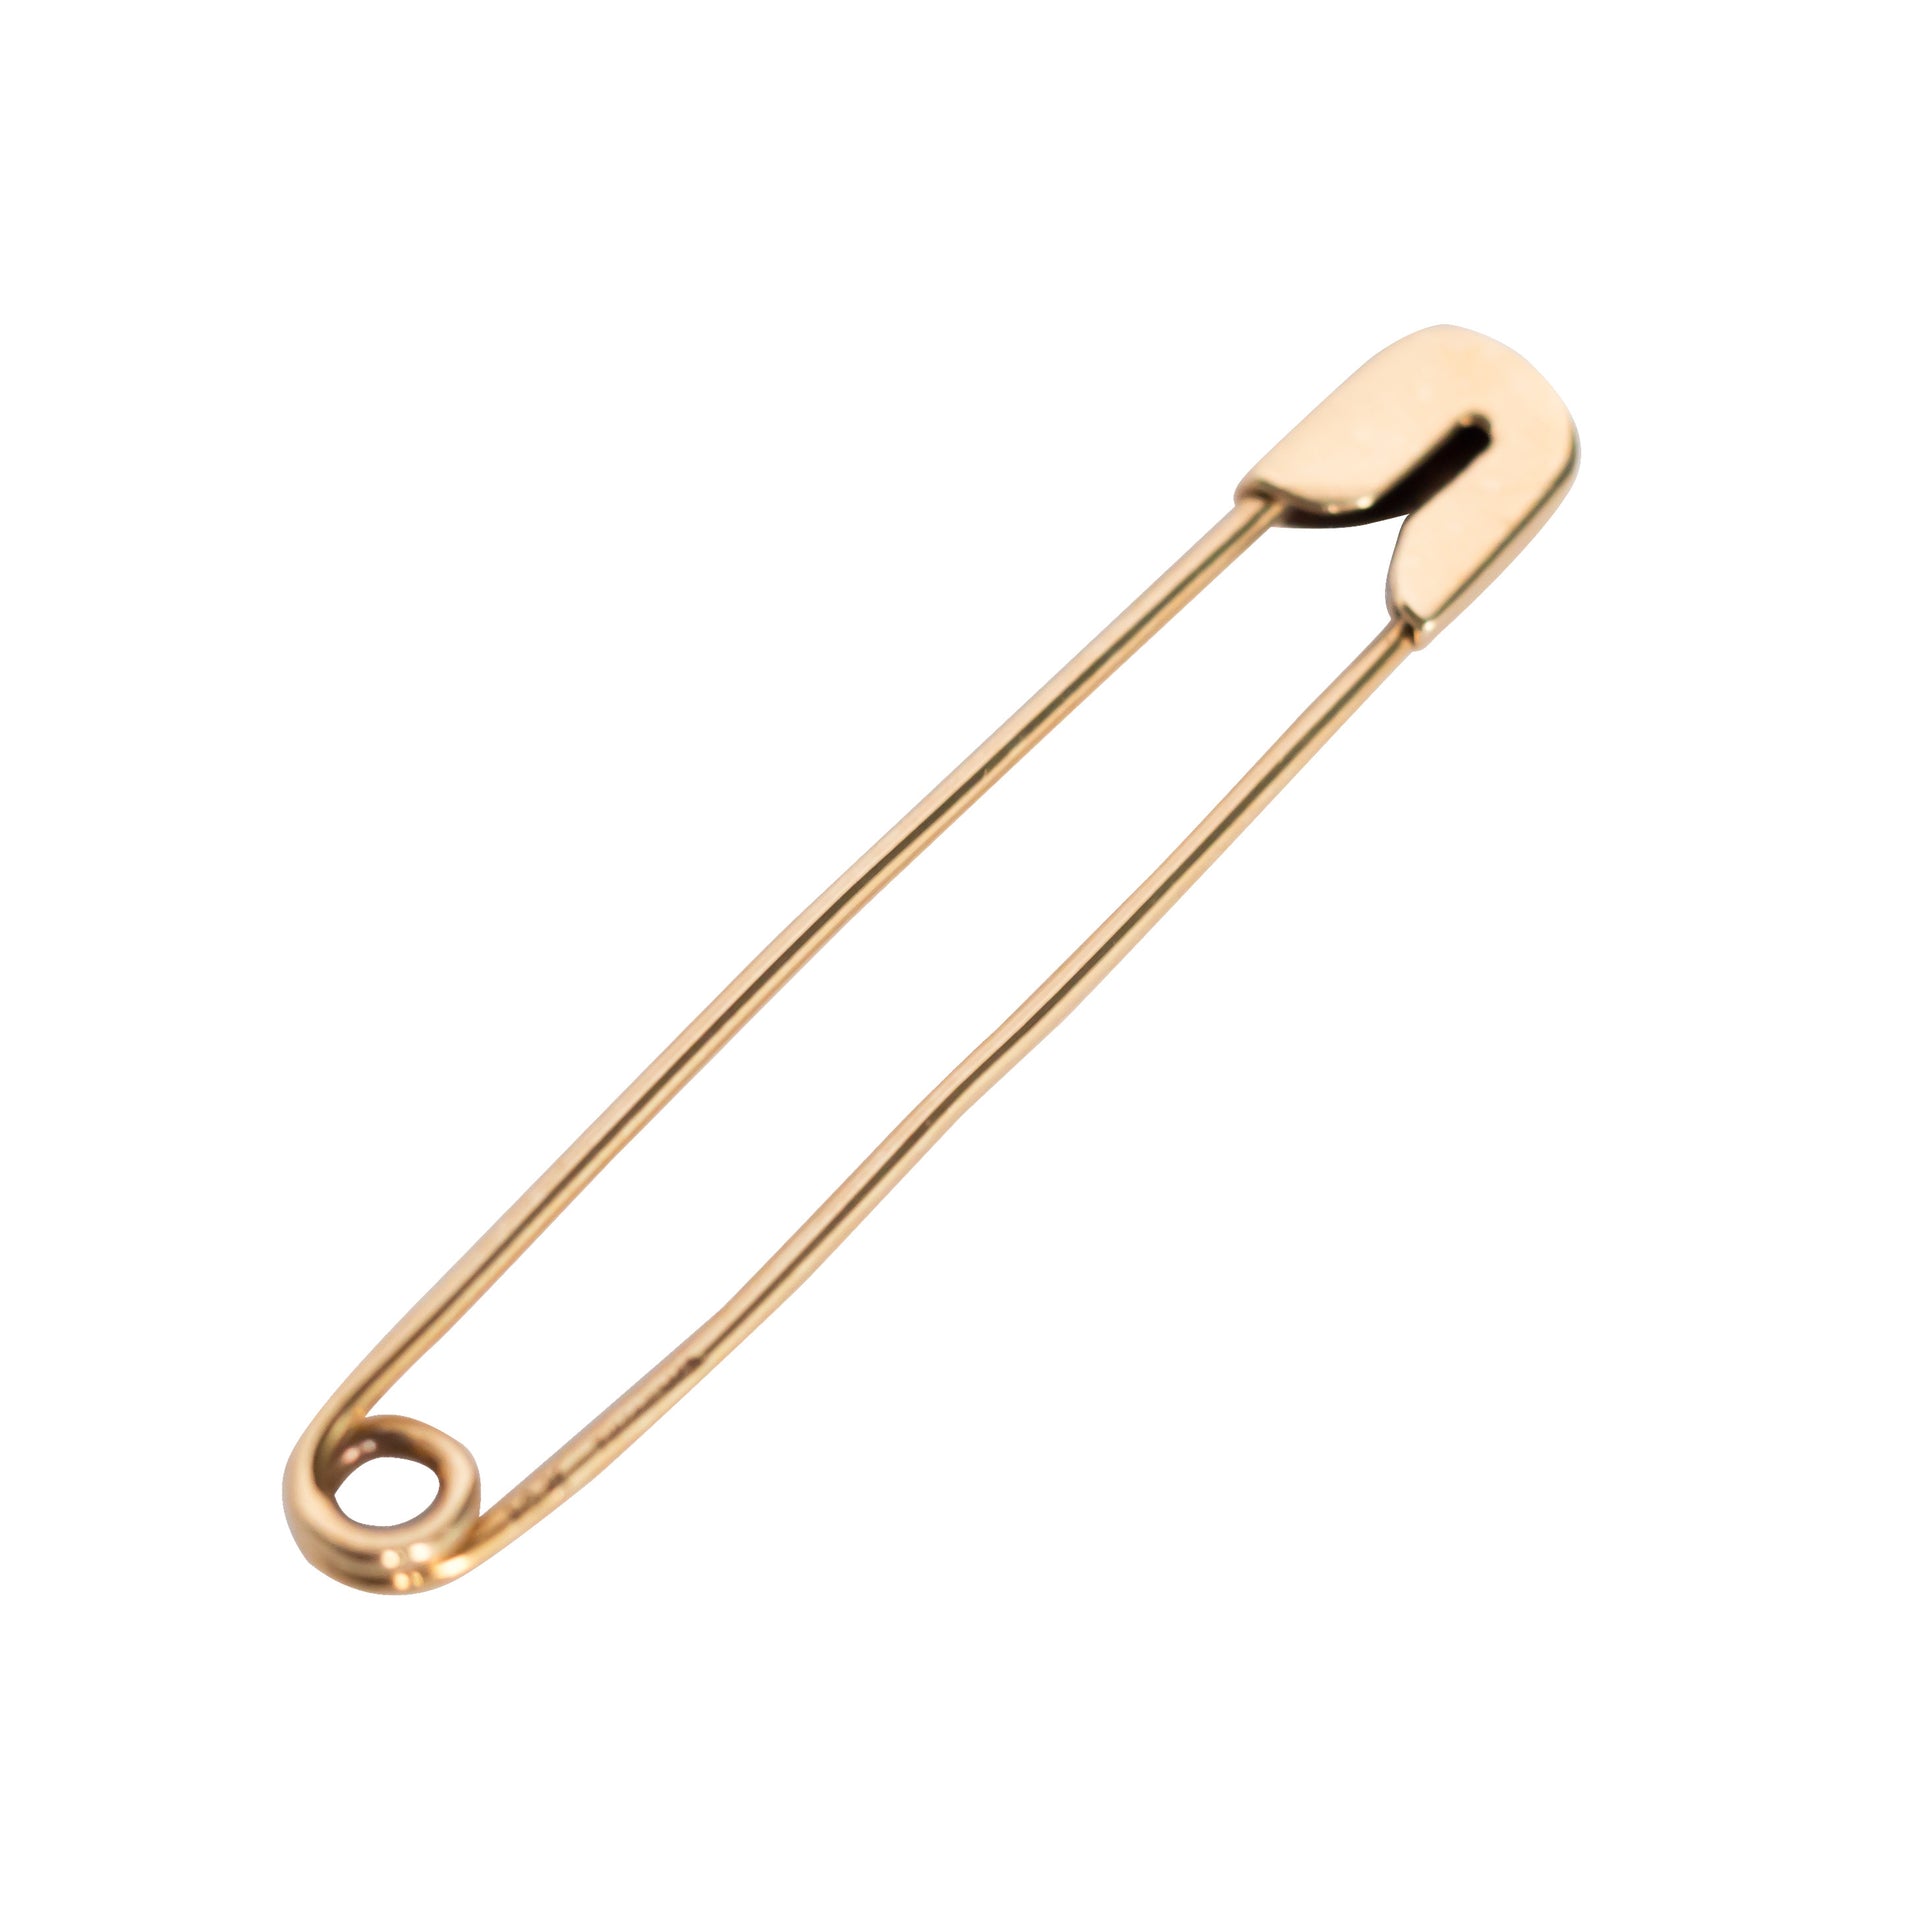 Tiffany and Co. Pave Diamond Gold Safety Pin Brooch For Sale at